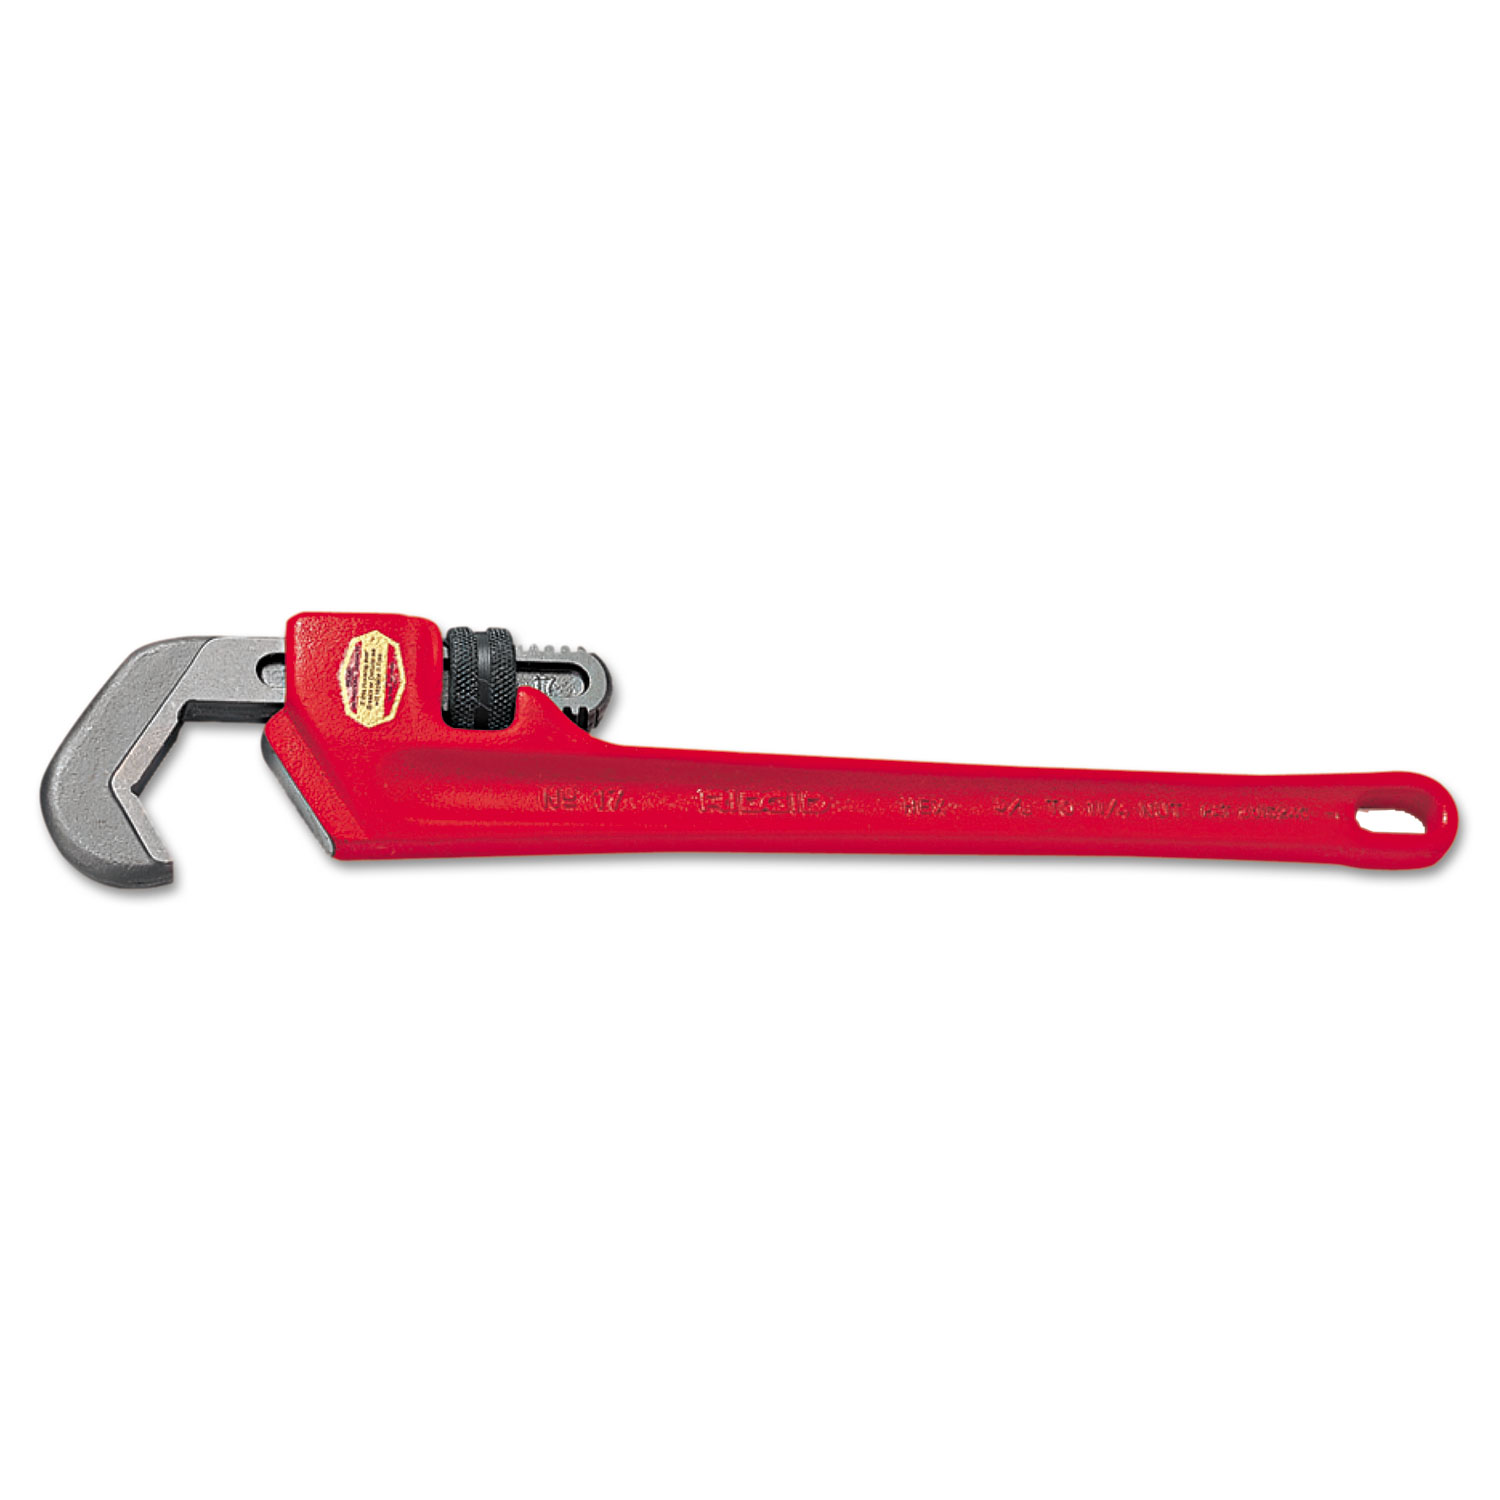 RIDGID Offset Hex Pipe Wrench, 9 1/2 Long, 2 5/8 Capacity